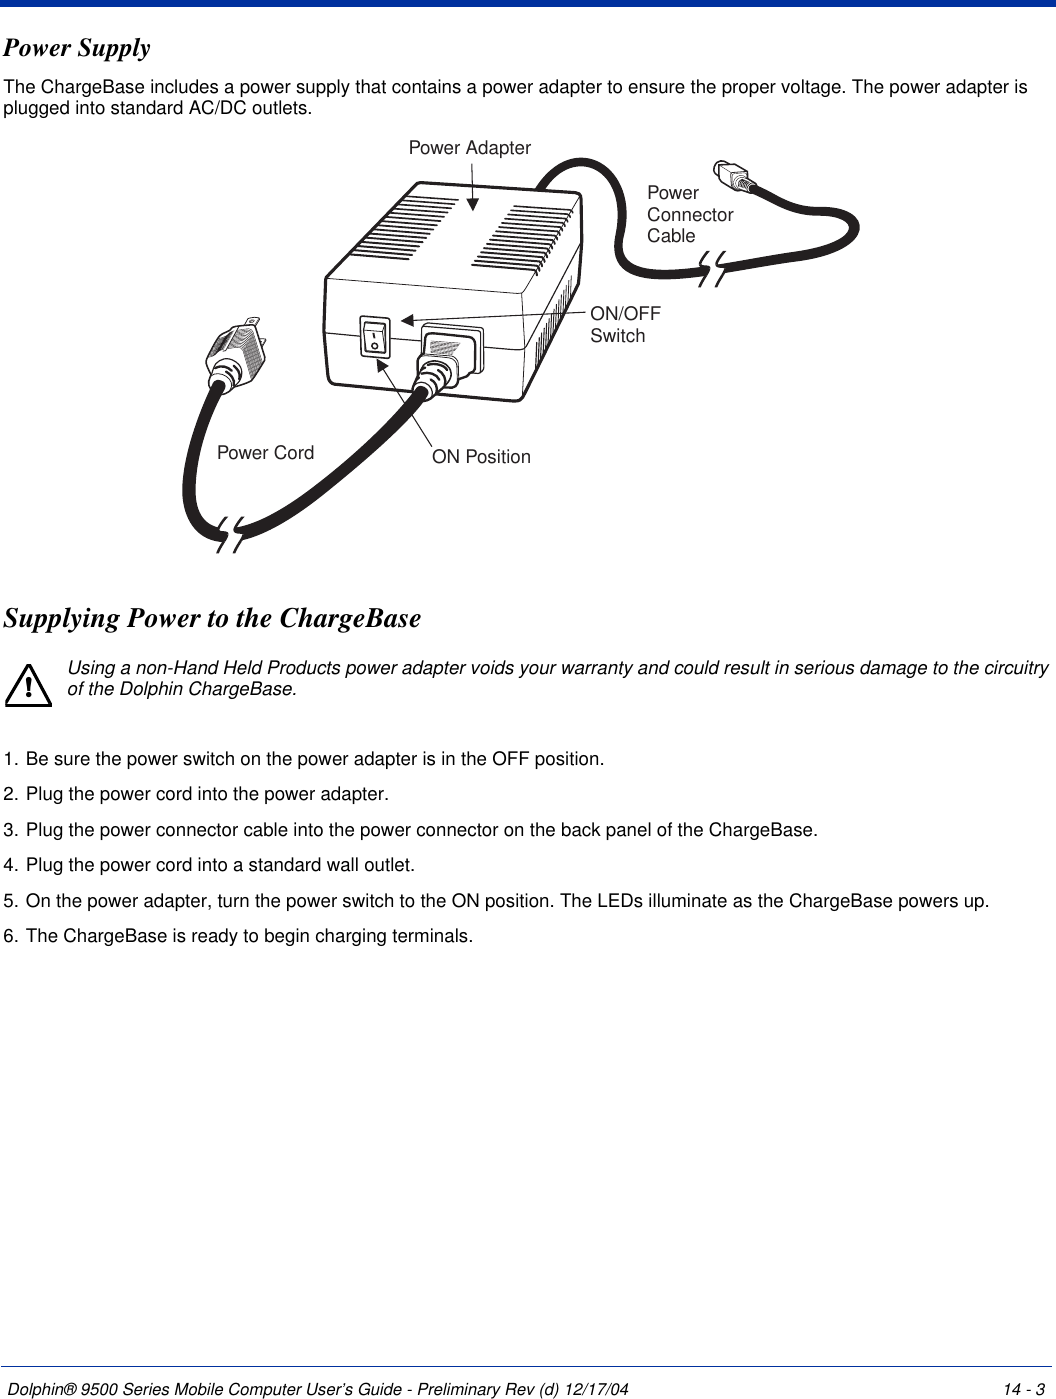 Dolphin® 9500 Series Mobile Computer User’s Guide - Preliminary Rev (d) 12/17/04 14 - 3Power SupplyThe ChargeBase includes a power supply that contains a power adapter to ensure the proper voltage. The power adapter is plugged into standard AC/DC outlets.Supplying Power to the ChargeBaseUsing a non-Hand Held Products power adapter voids your warranty and could result in serious damage to the circuitry of the Dolphin ChargeBase.1. Be sure the power switch on the power adapter is in the OFF position. 2. Plug the power cord into the power adapter.3. Plug the power connector cable into the power connector on the back panel of the ChargeBase.4. Plug the power cord into a standard wall outlet.5. On the power adapter, turn the power switch to the ON position. The LEDs illuminate as the ChargeBase powers up.6. The ChargeBase is ready to begin charging terminals.Power CordON/OFFSwitchON PositionPower AdapterPowerConnectorCable!